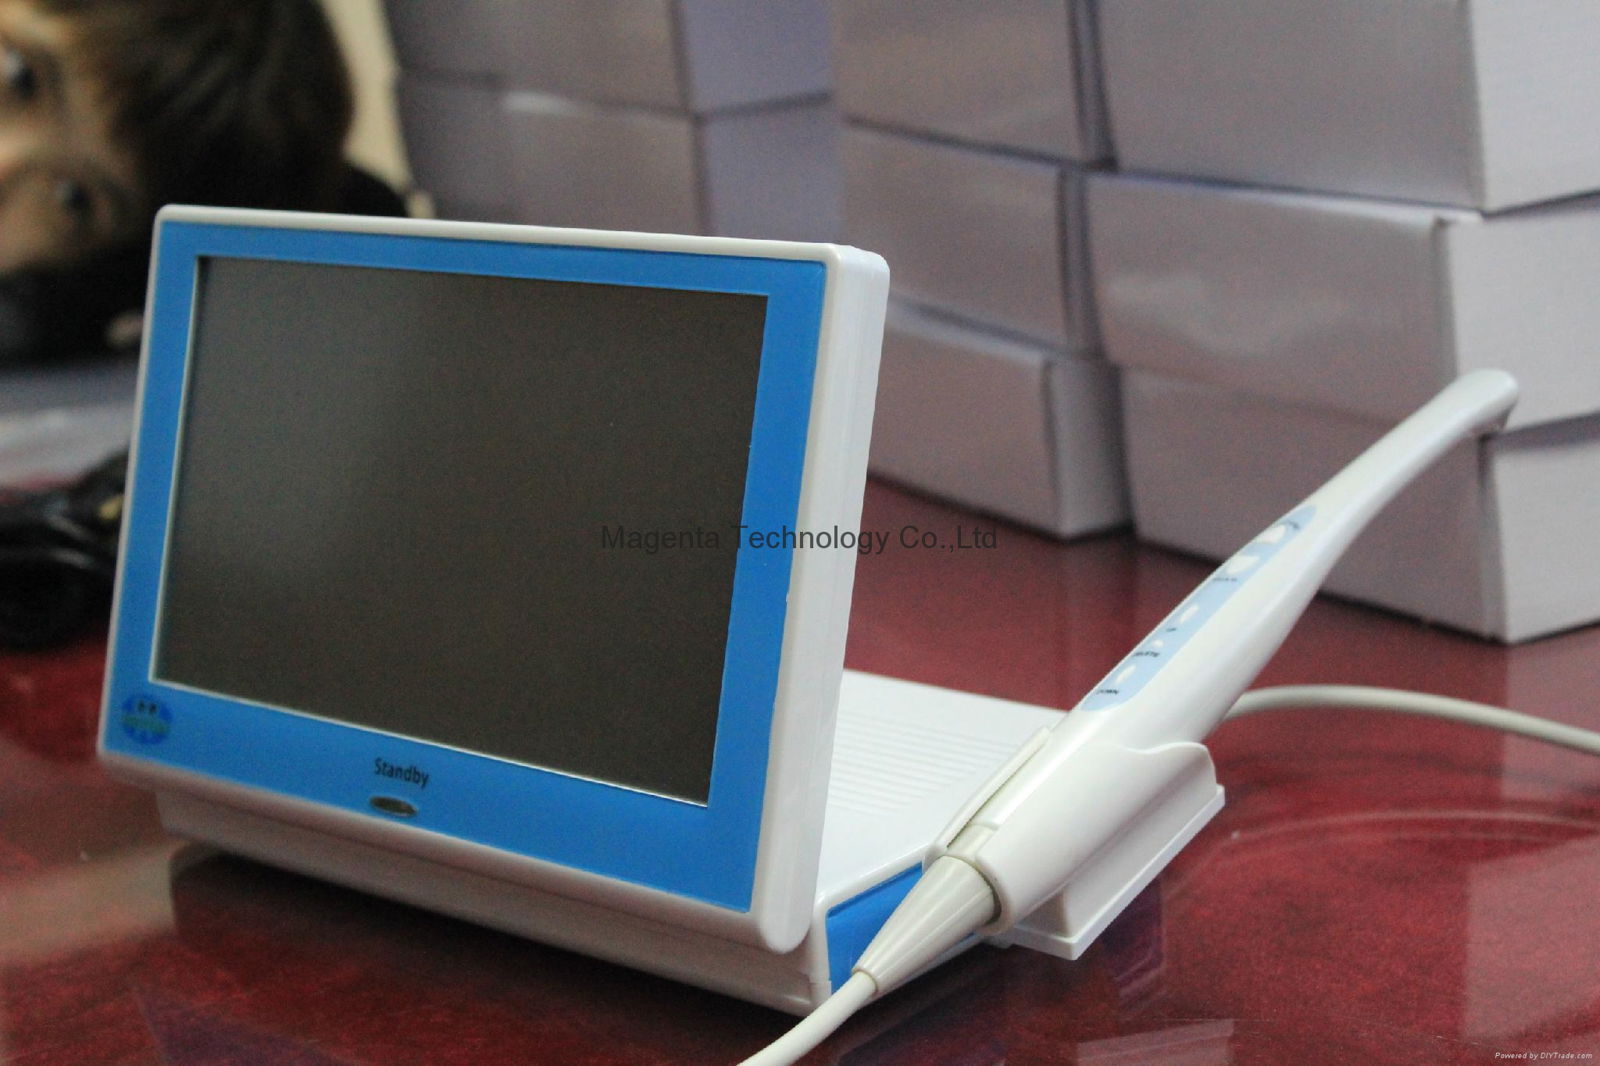 MD-318 8 inch touch screen portable intraoral camera 